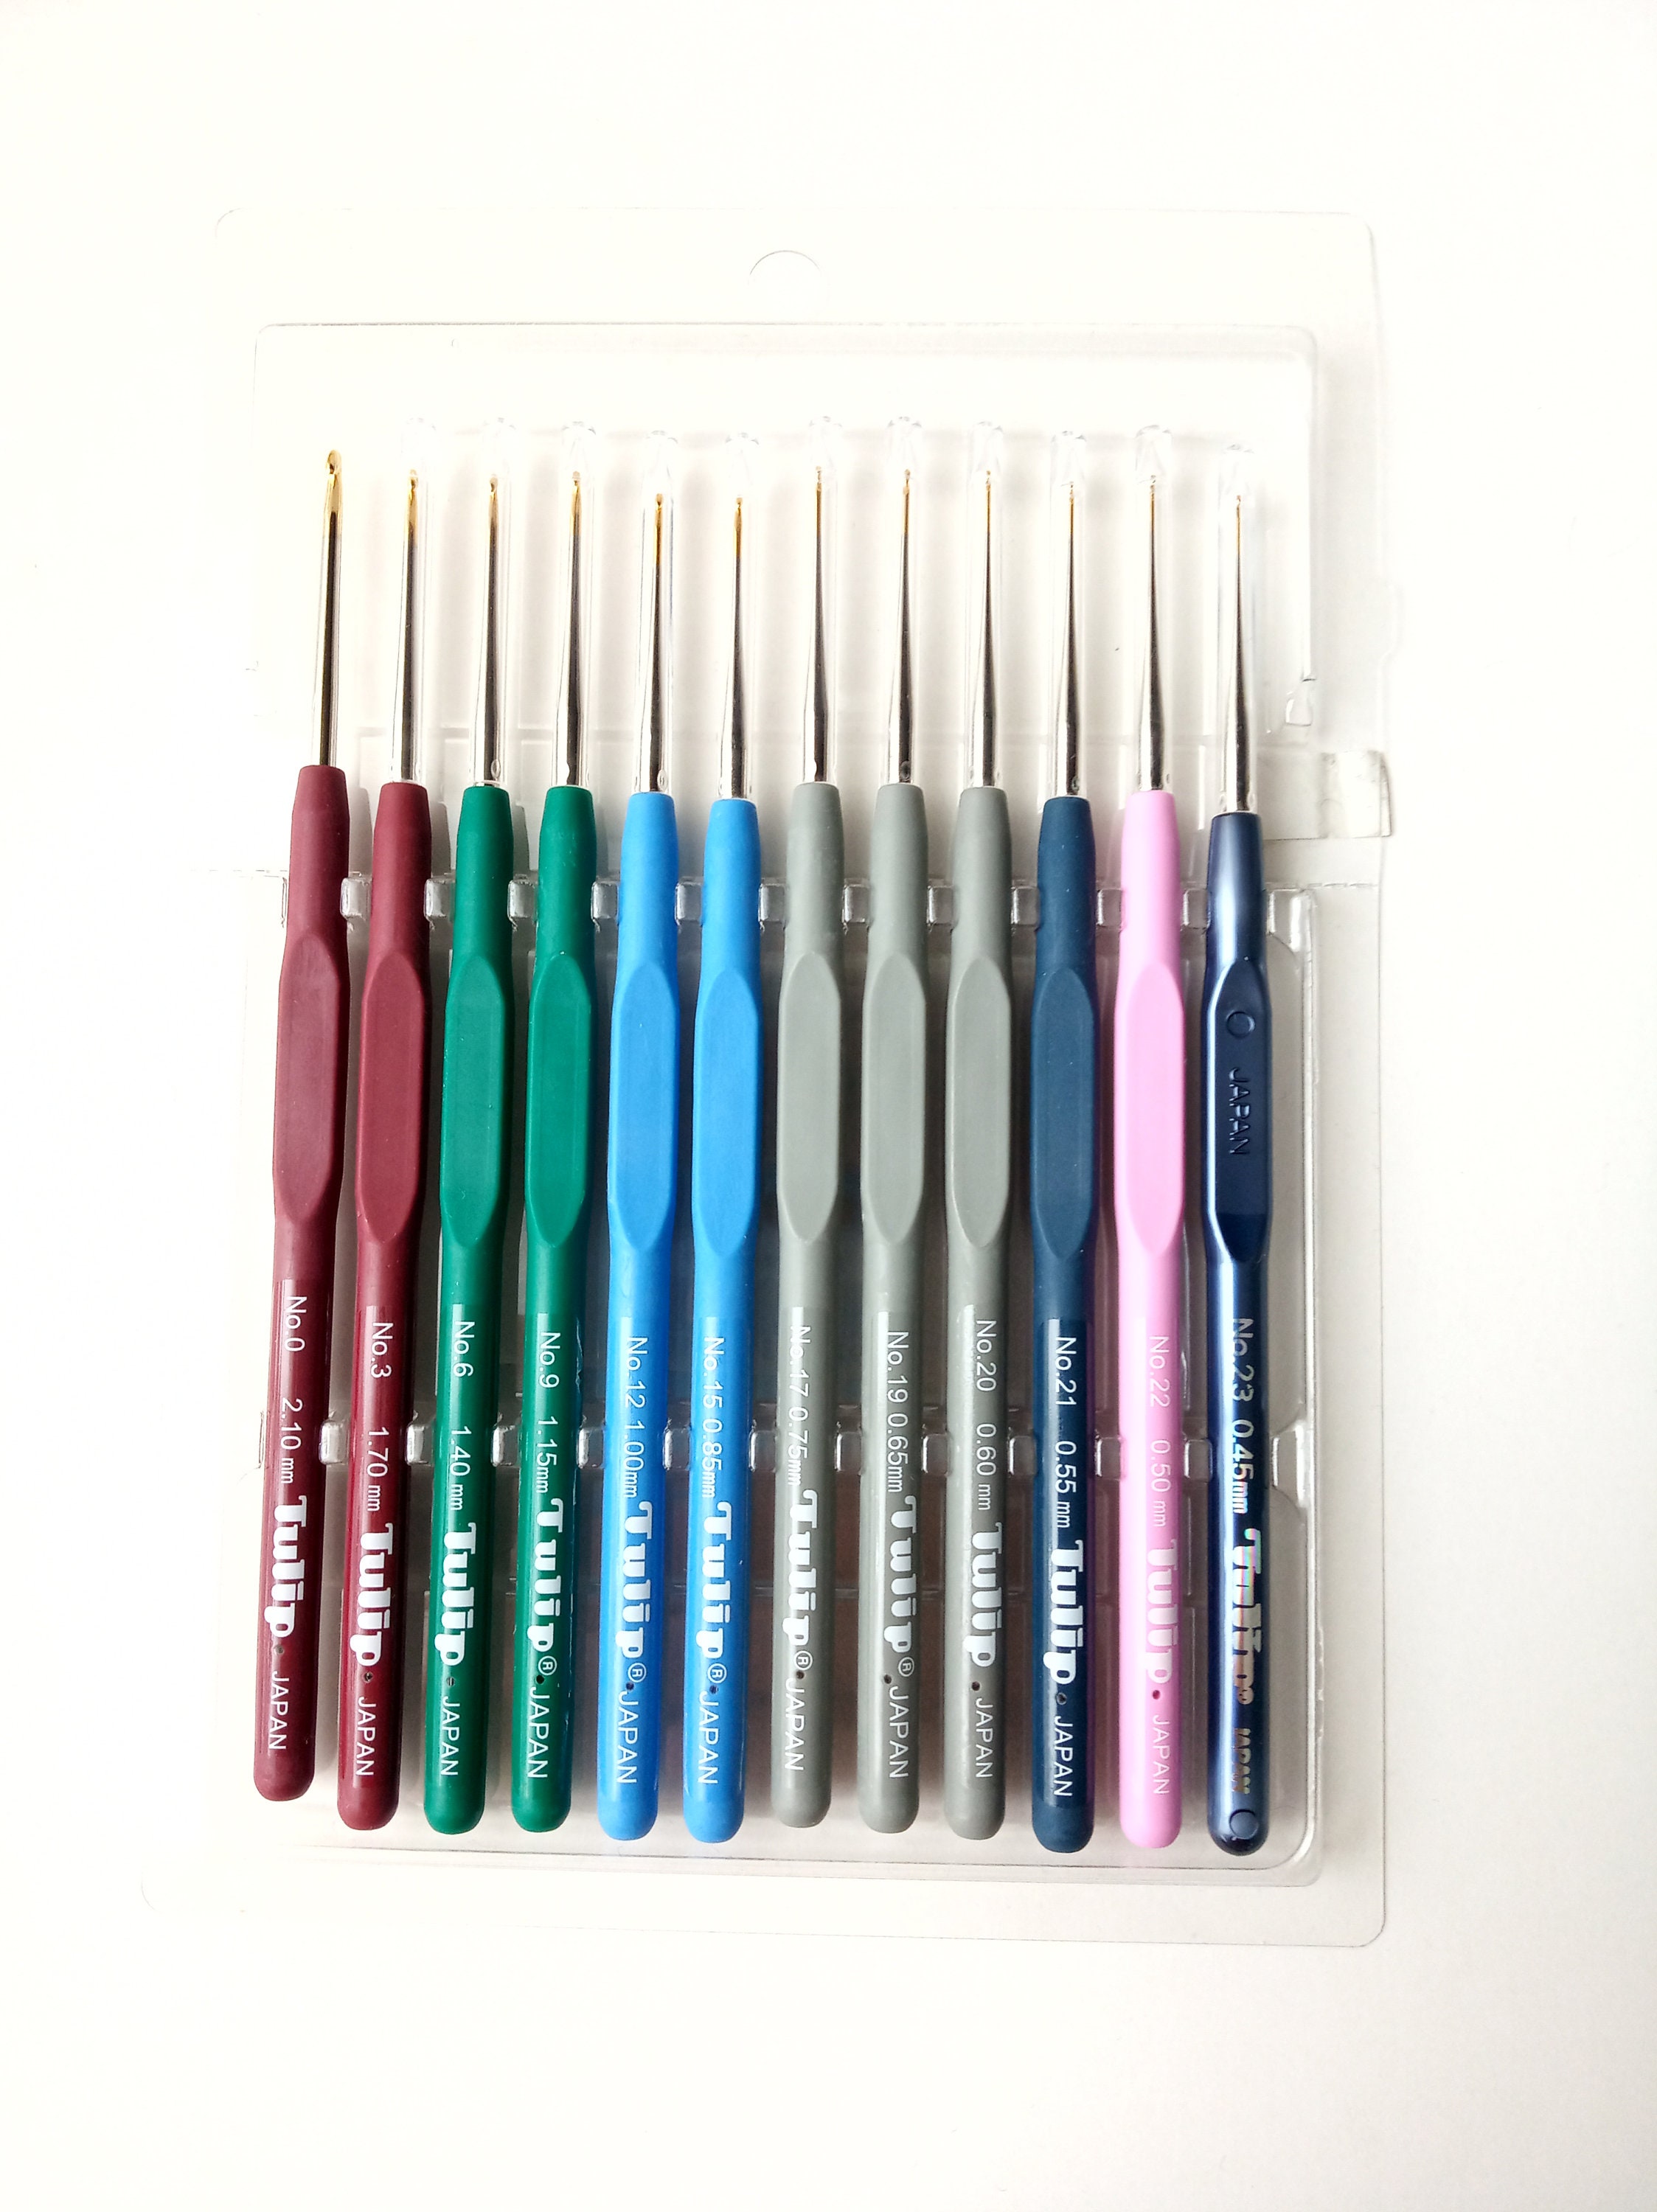 12 Different Size Tulip Fine Steel Soft Grip Crochet Hooks /hook Sizes  Included in This Set : 0, 3, 6, 9, 12, 15, 17, 19, 20, 21, 22, 23 